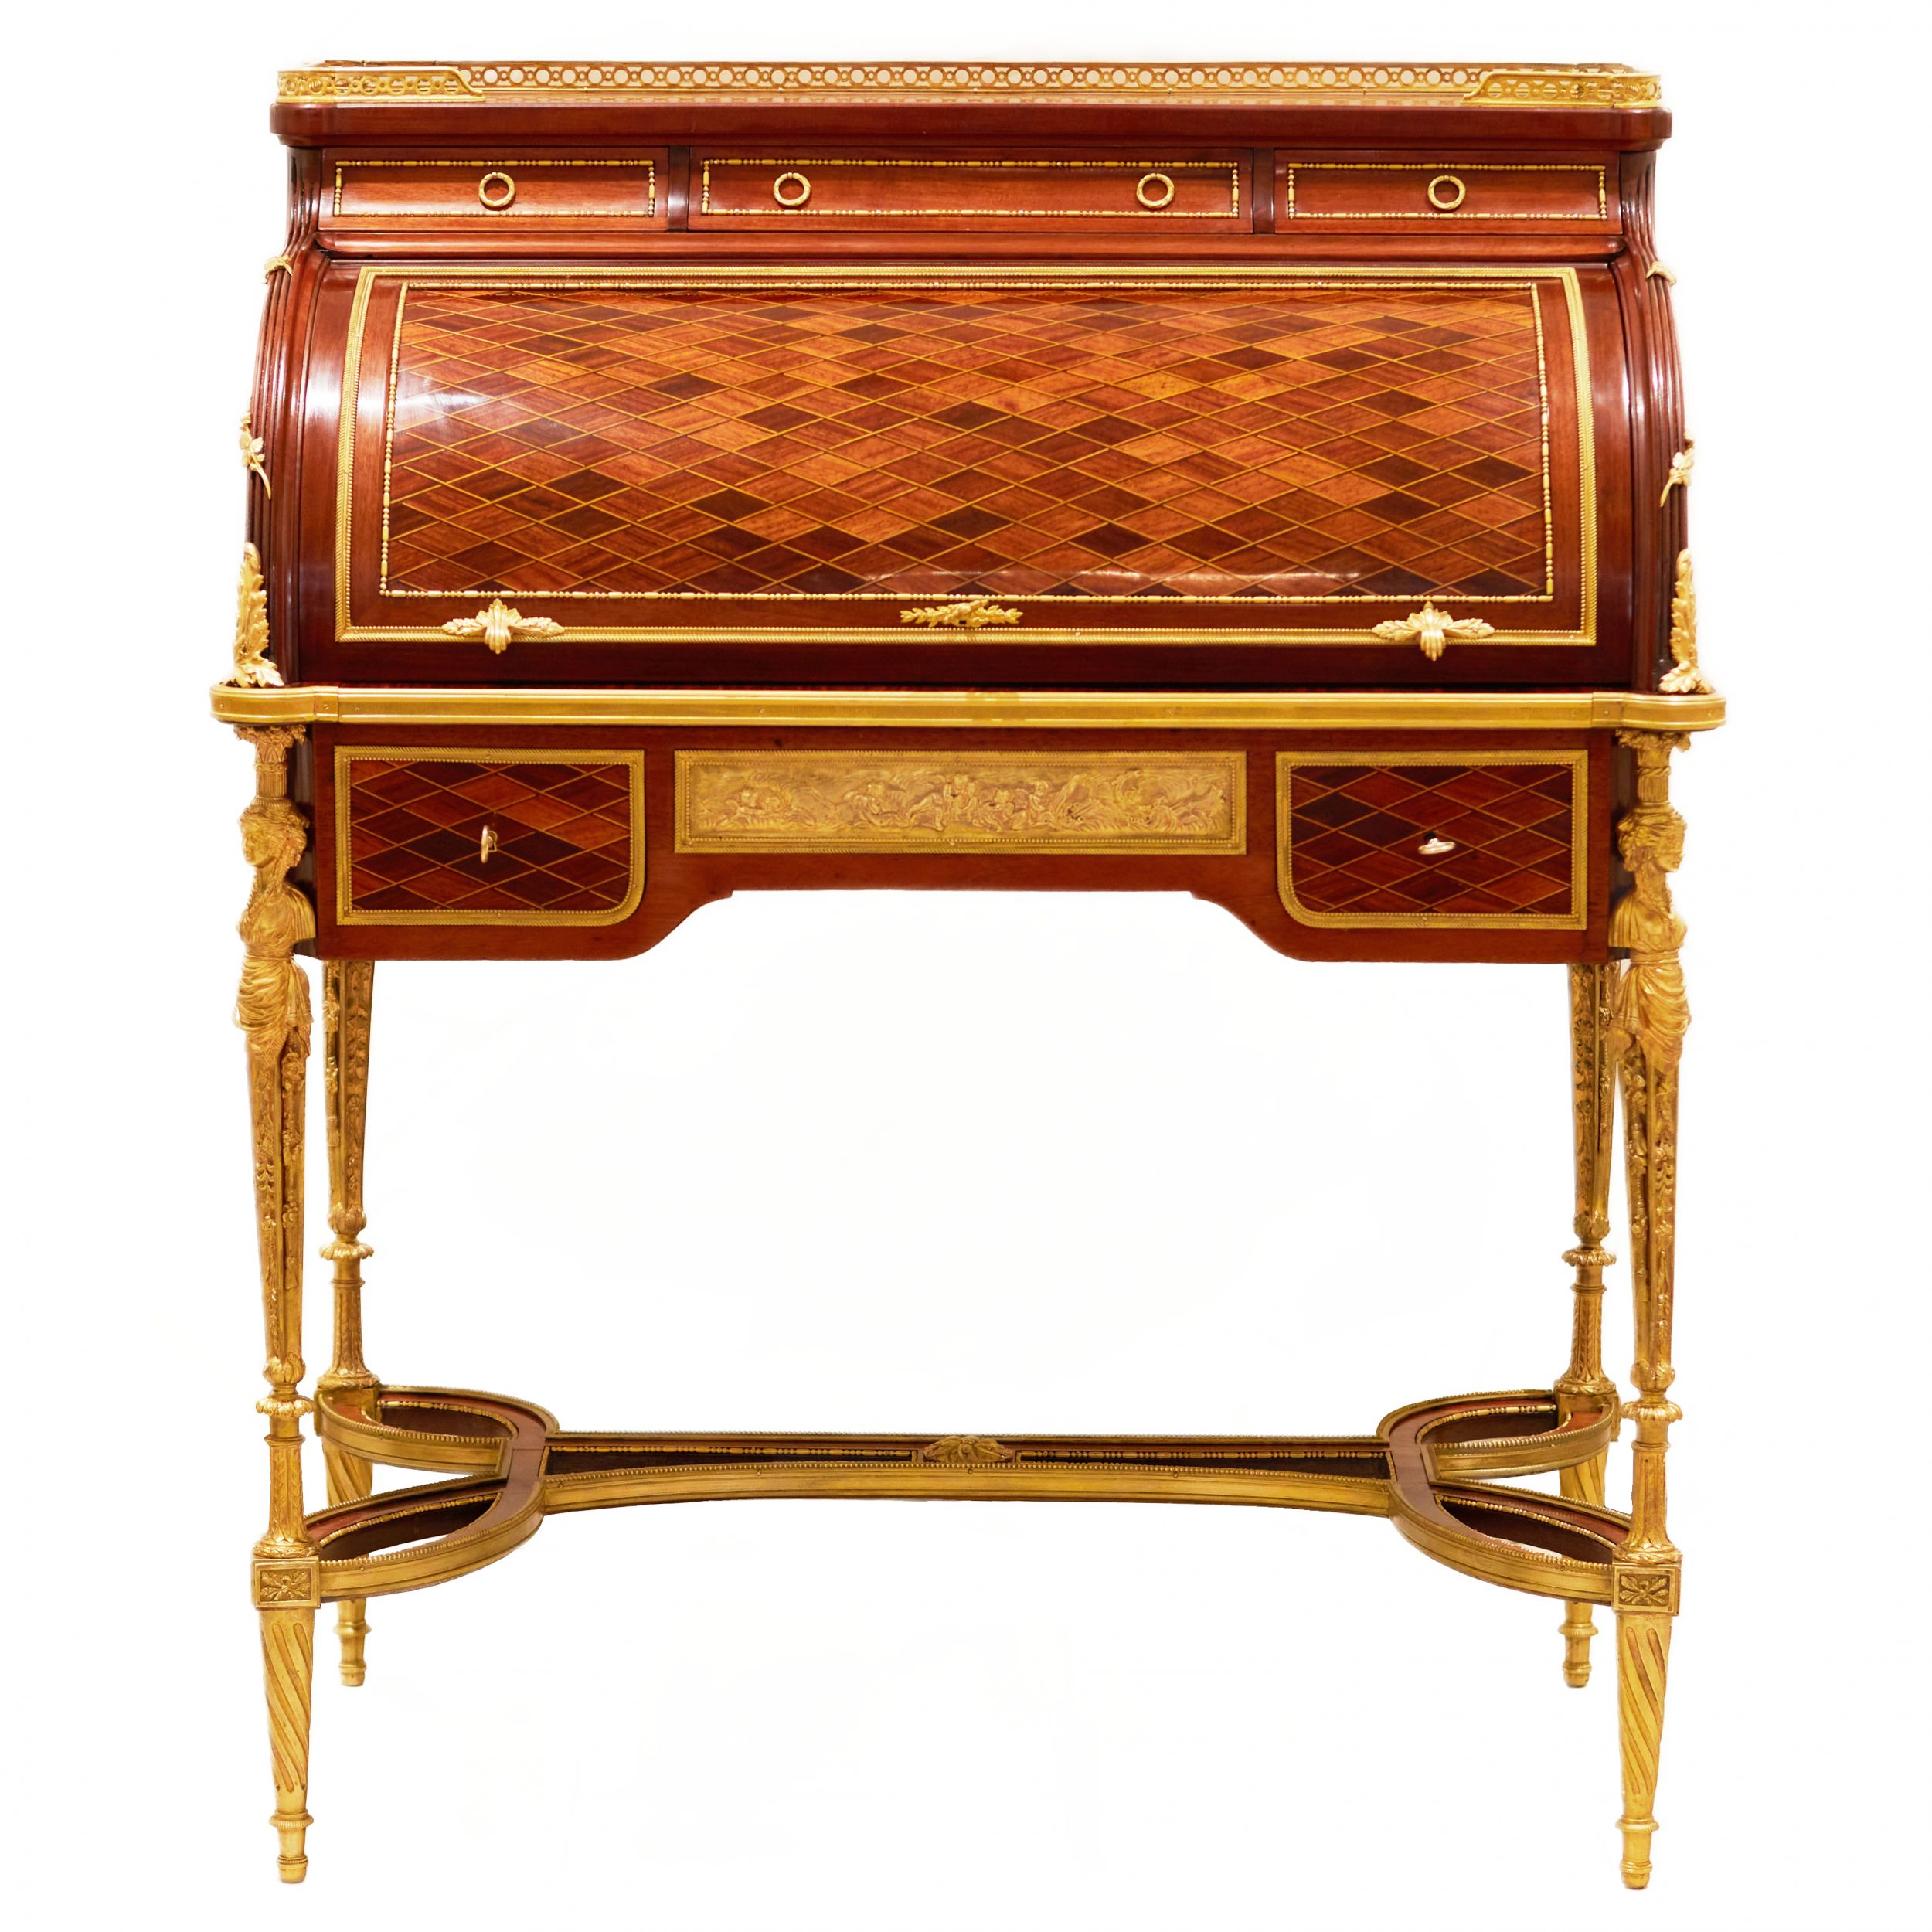 E.KAHN. A magnificent cylindrical bureau in mahogany and satin wood with gilt bronze. - Image 3 of 14